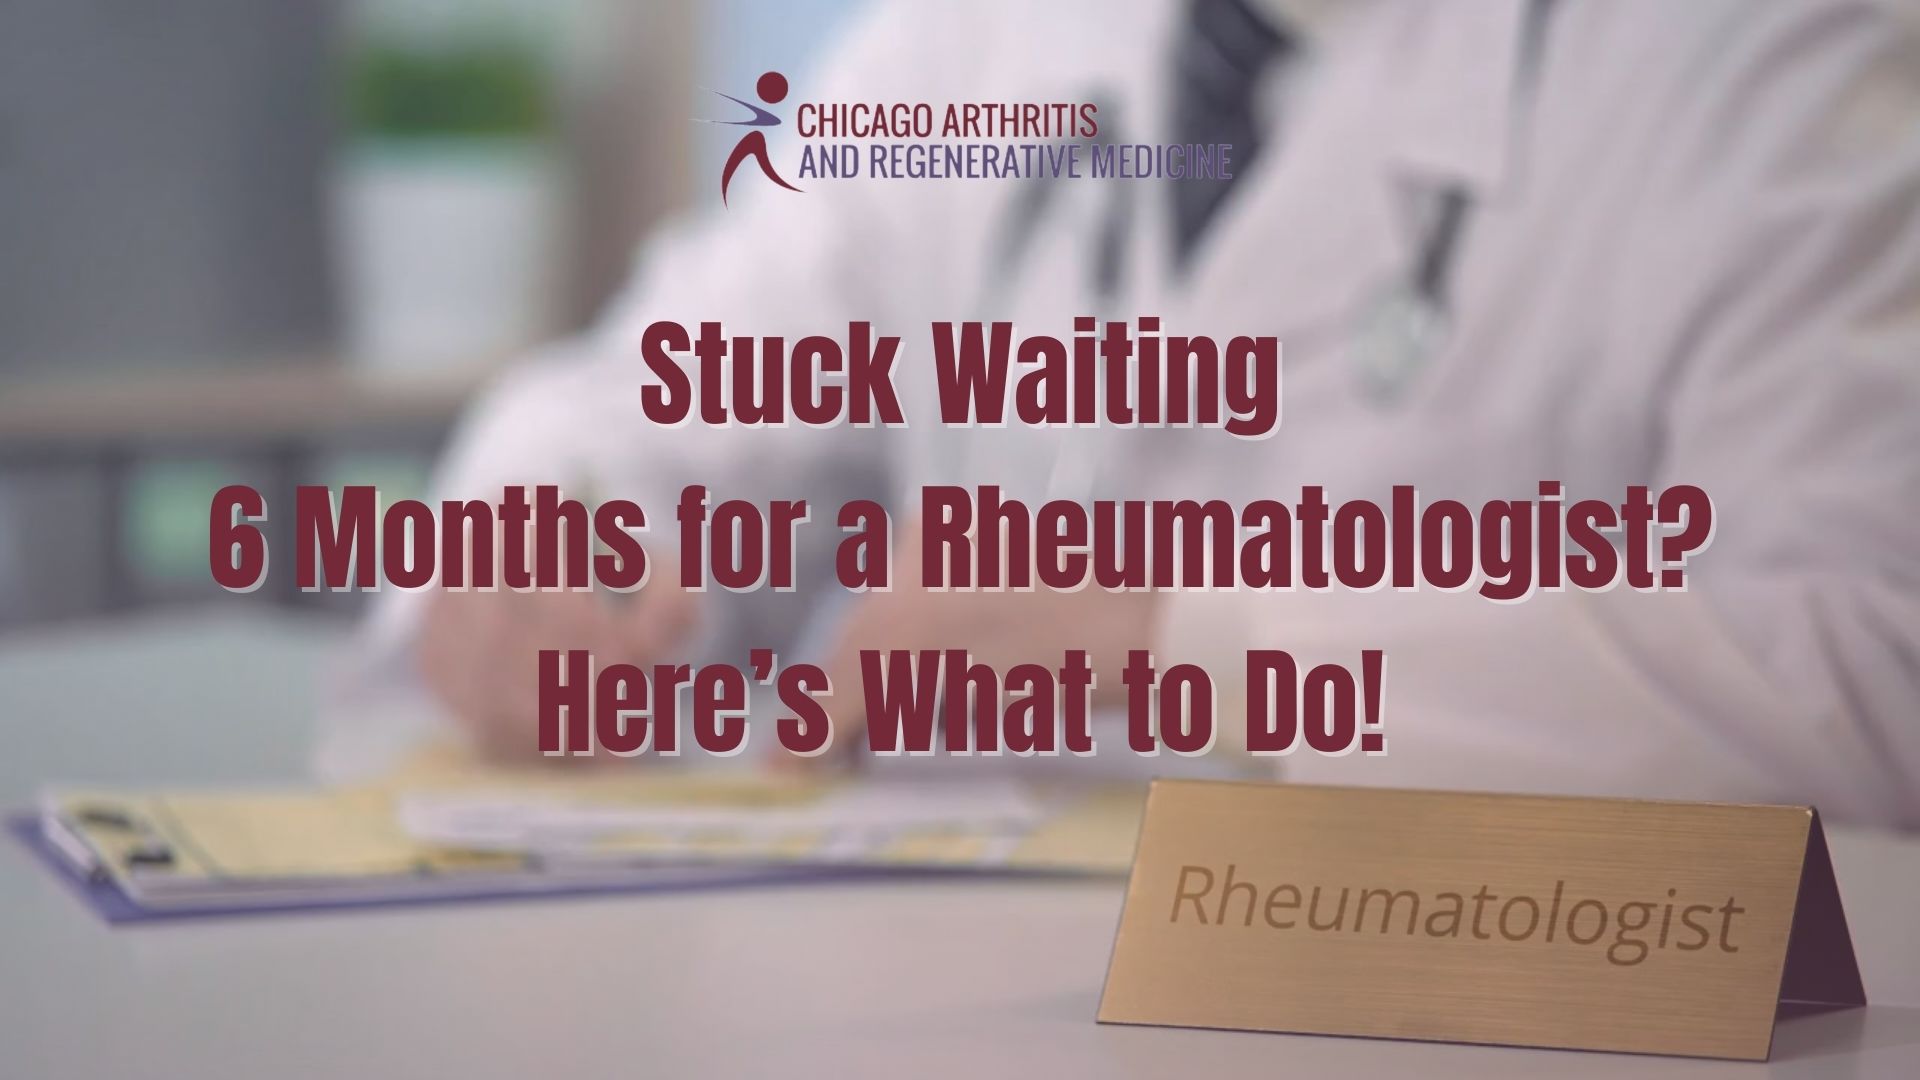 Stuck Waiting 6 Months for a Rheumatologist? Here’s What to Do!